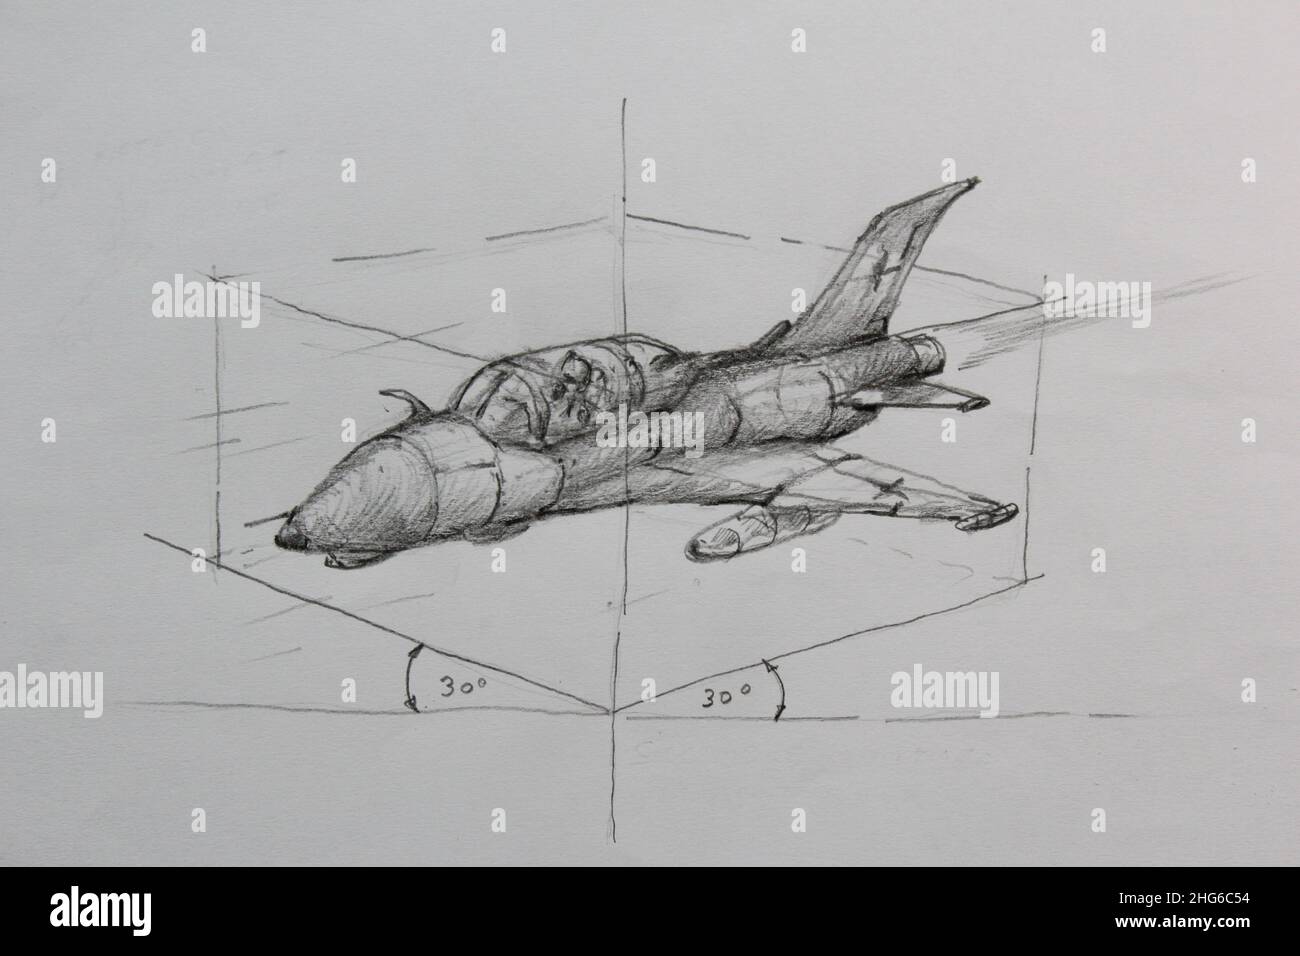 Drawing isometric of the rocket plane by free hand sketch. Stock Photo